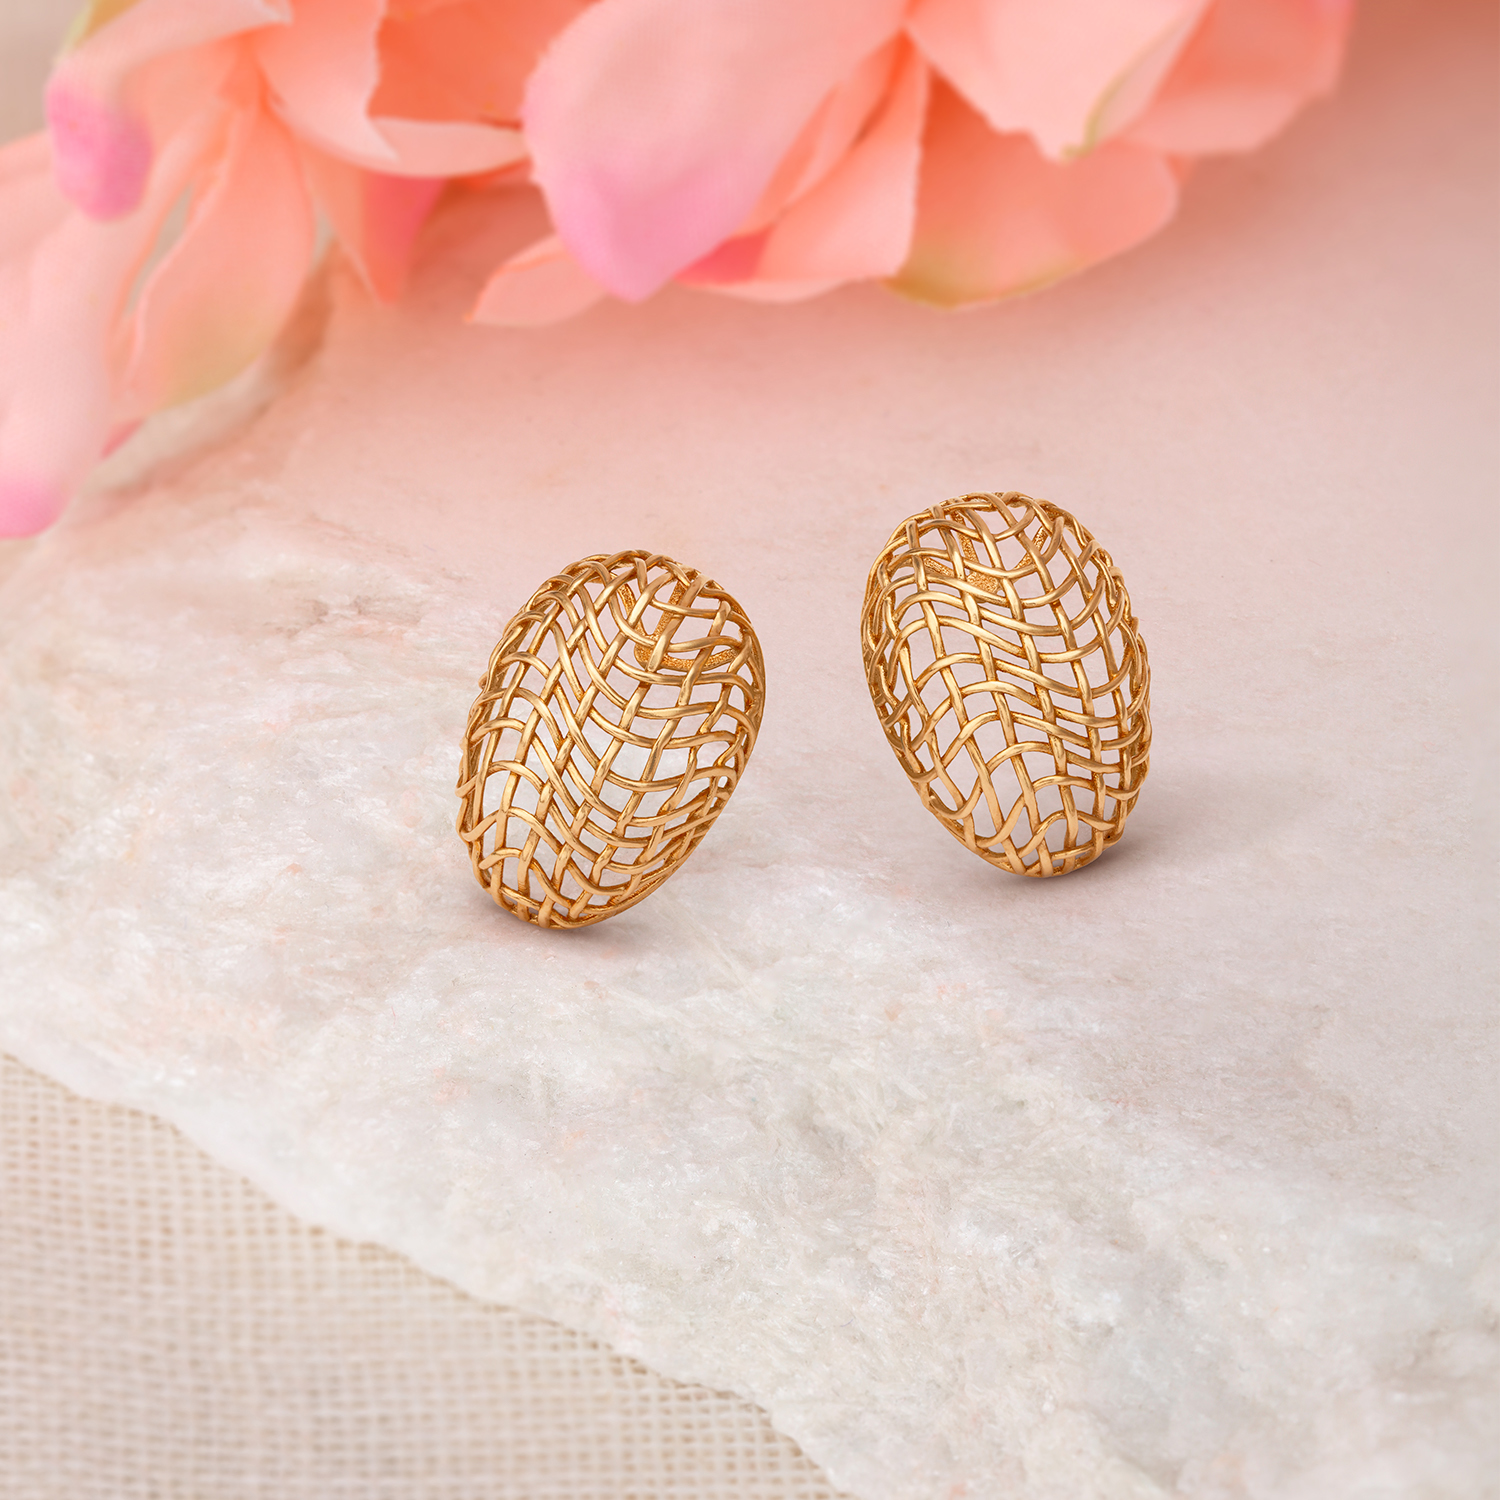 Edgy Chic Gold Stud Earrings